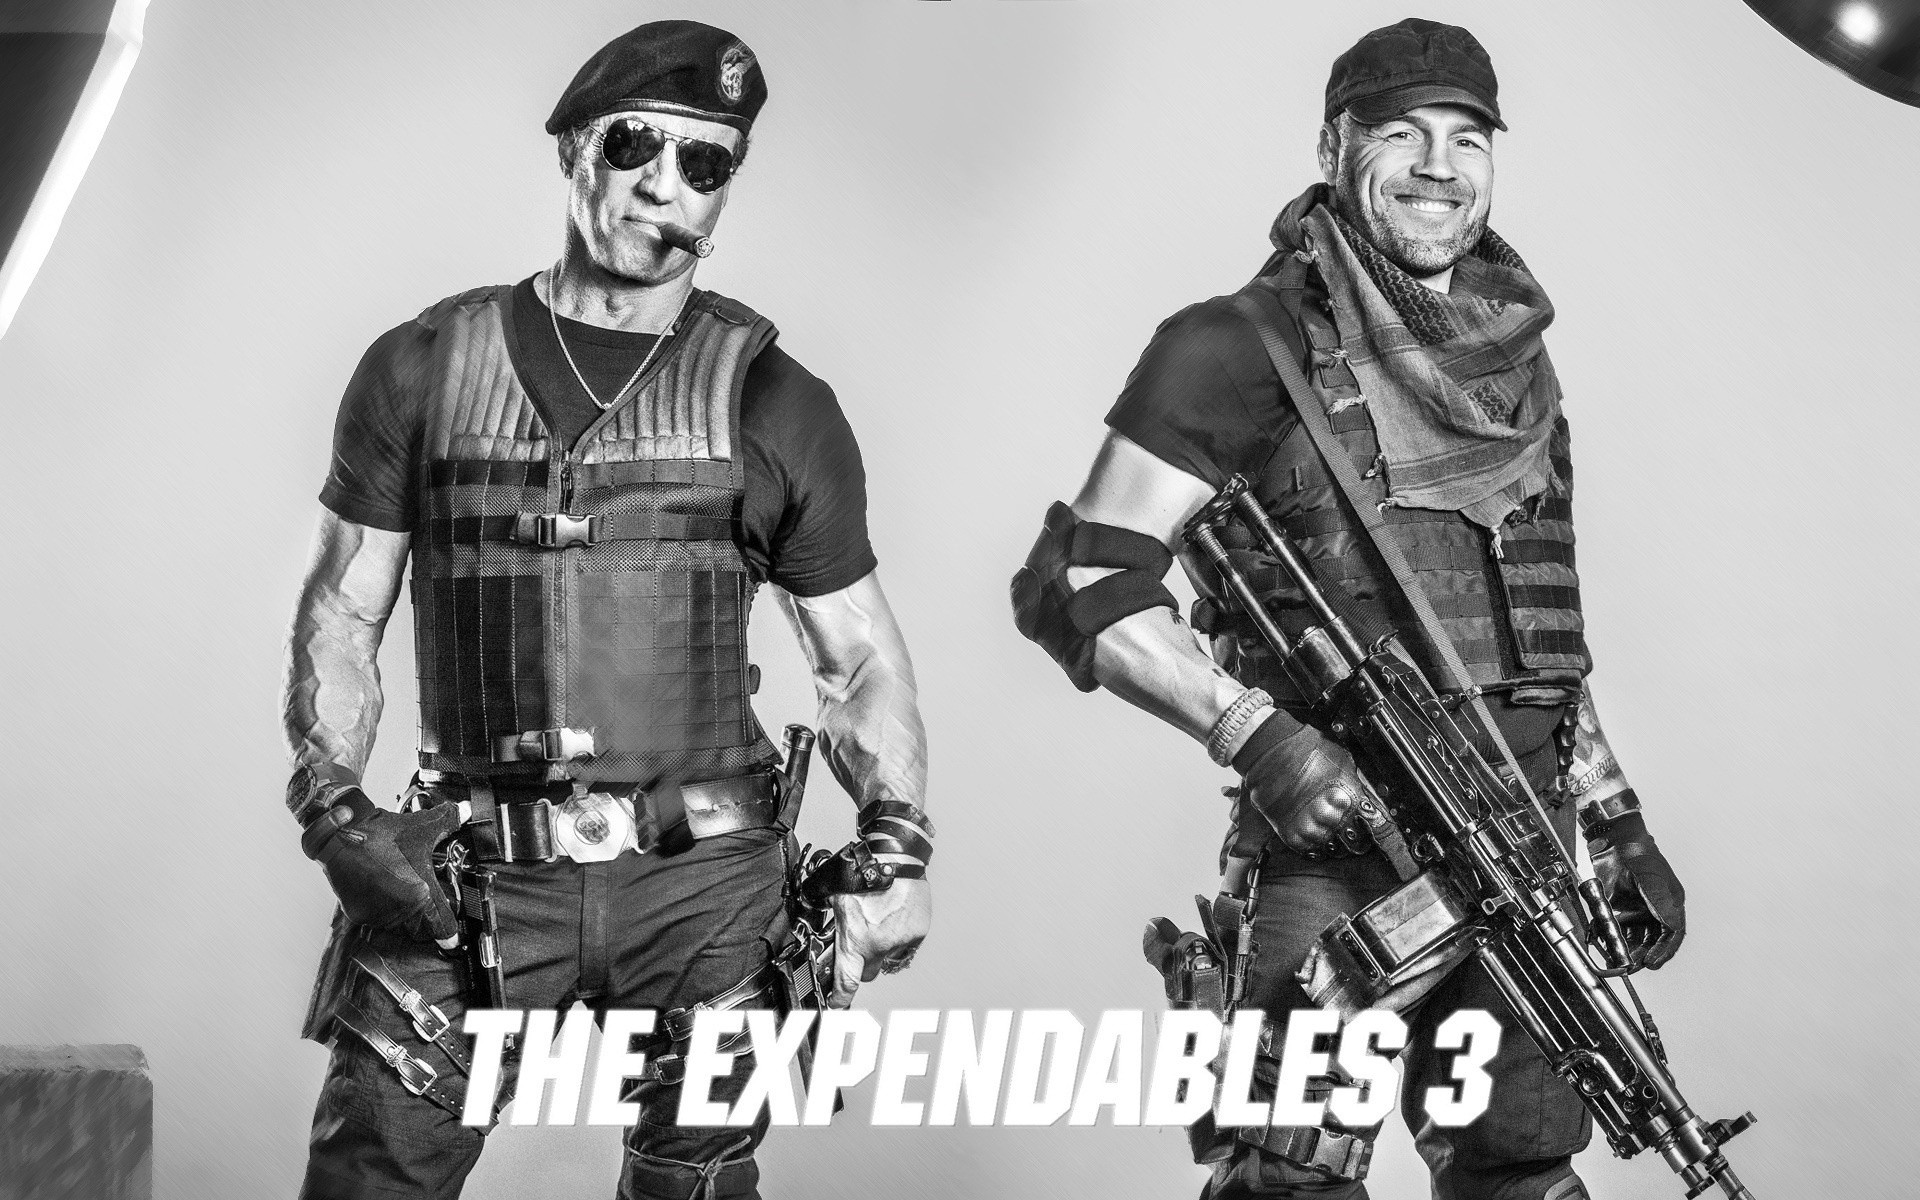 The Expendables 3 Monochrome Sylvester Stallone The Expendables Movies Cigars 1920x1200